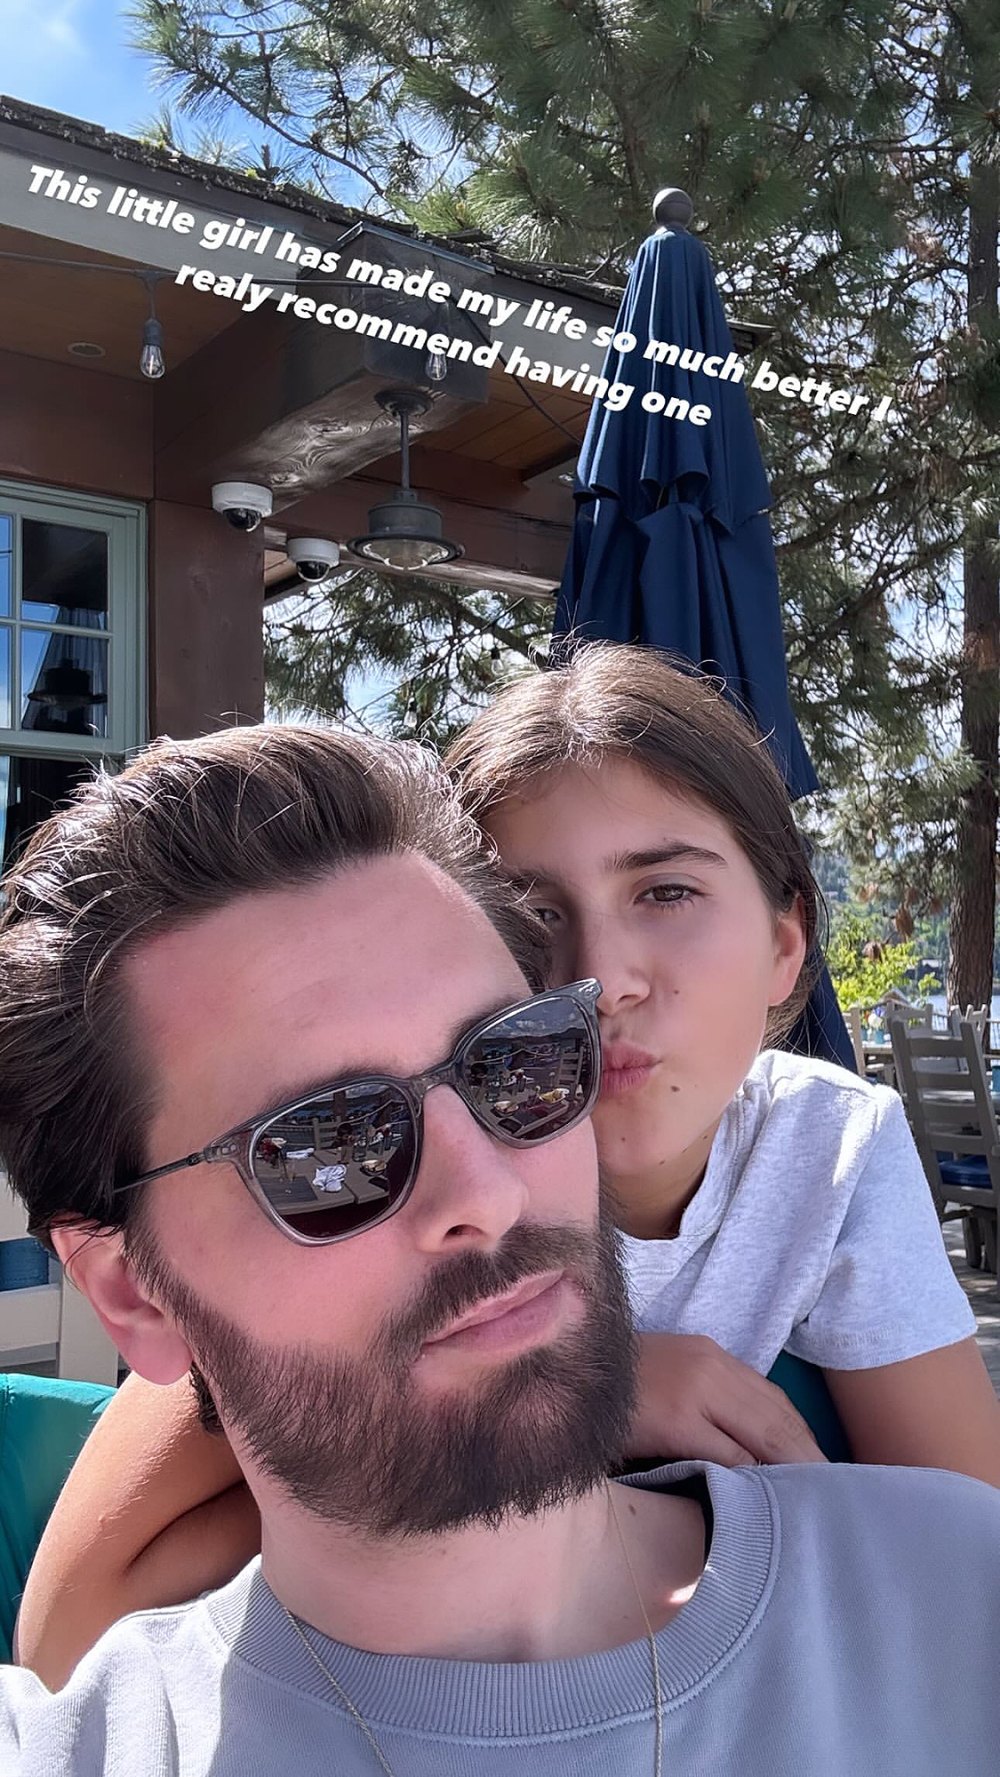 Scott Disick Gushes That Daughter Penelope, 11, Is Making 'Life So Much Better'